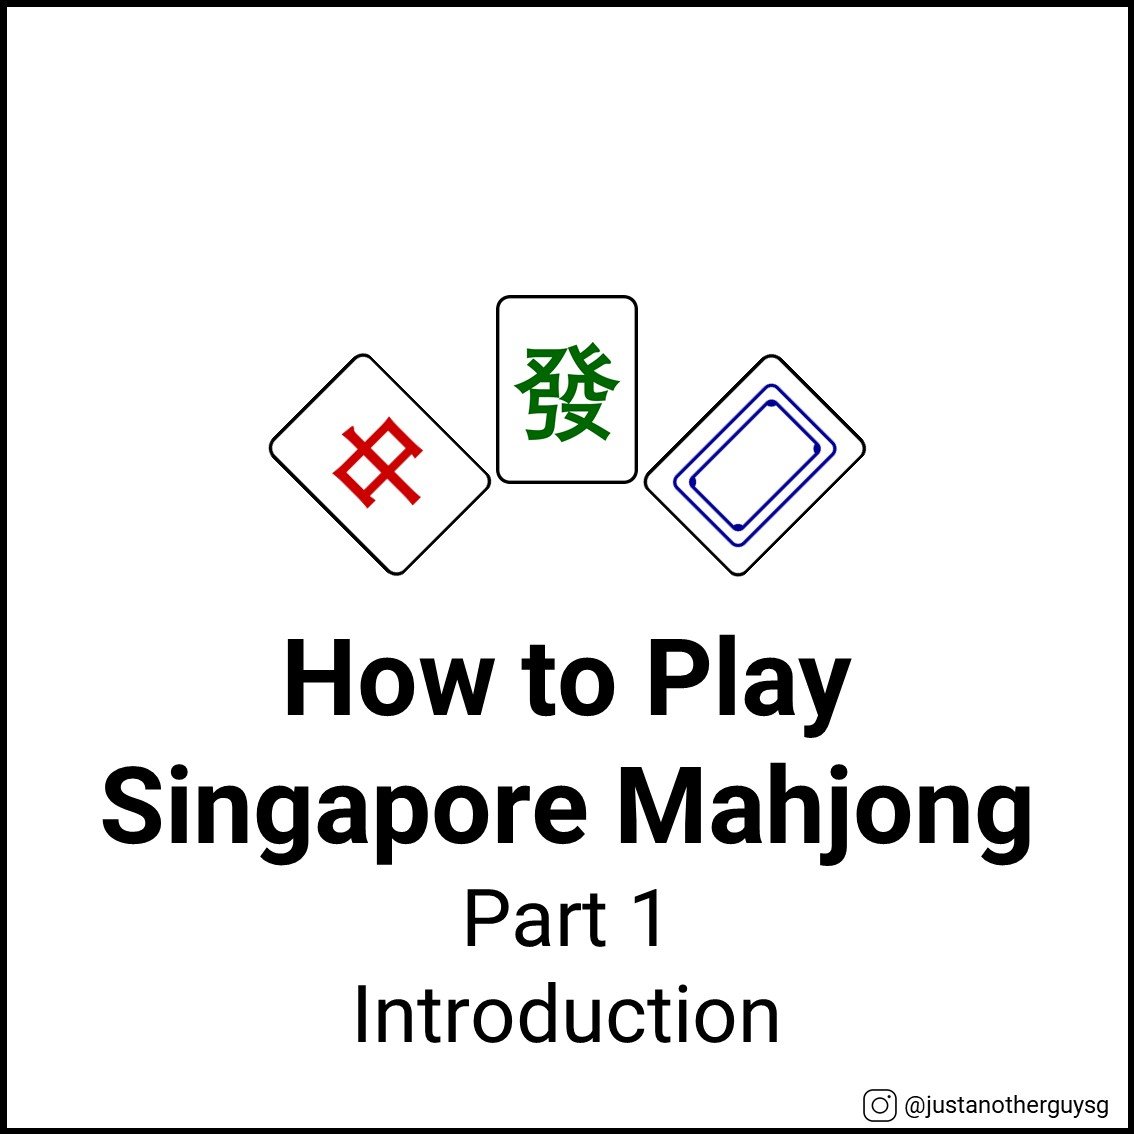 How to Play Mahjong - Part 1 Introduction